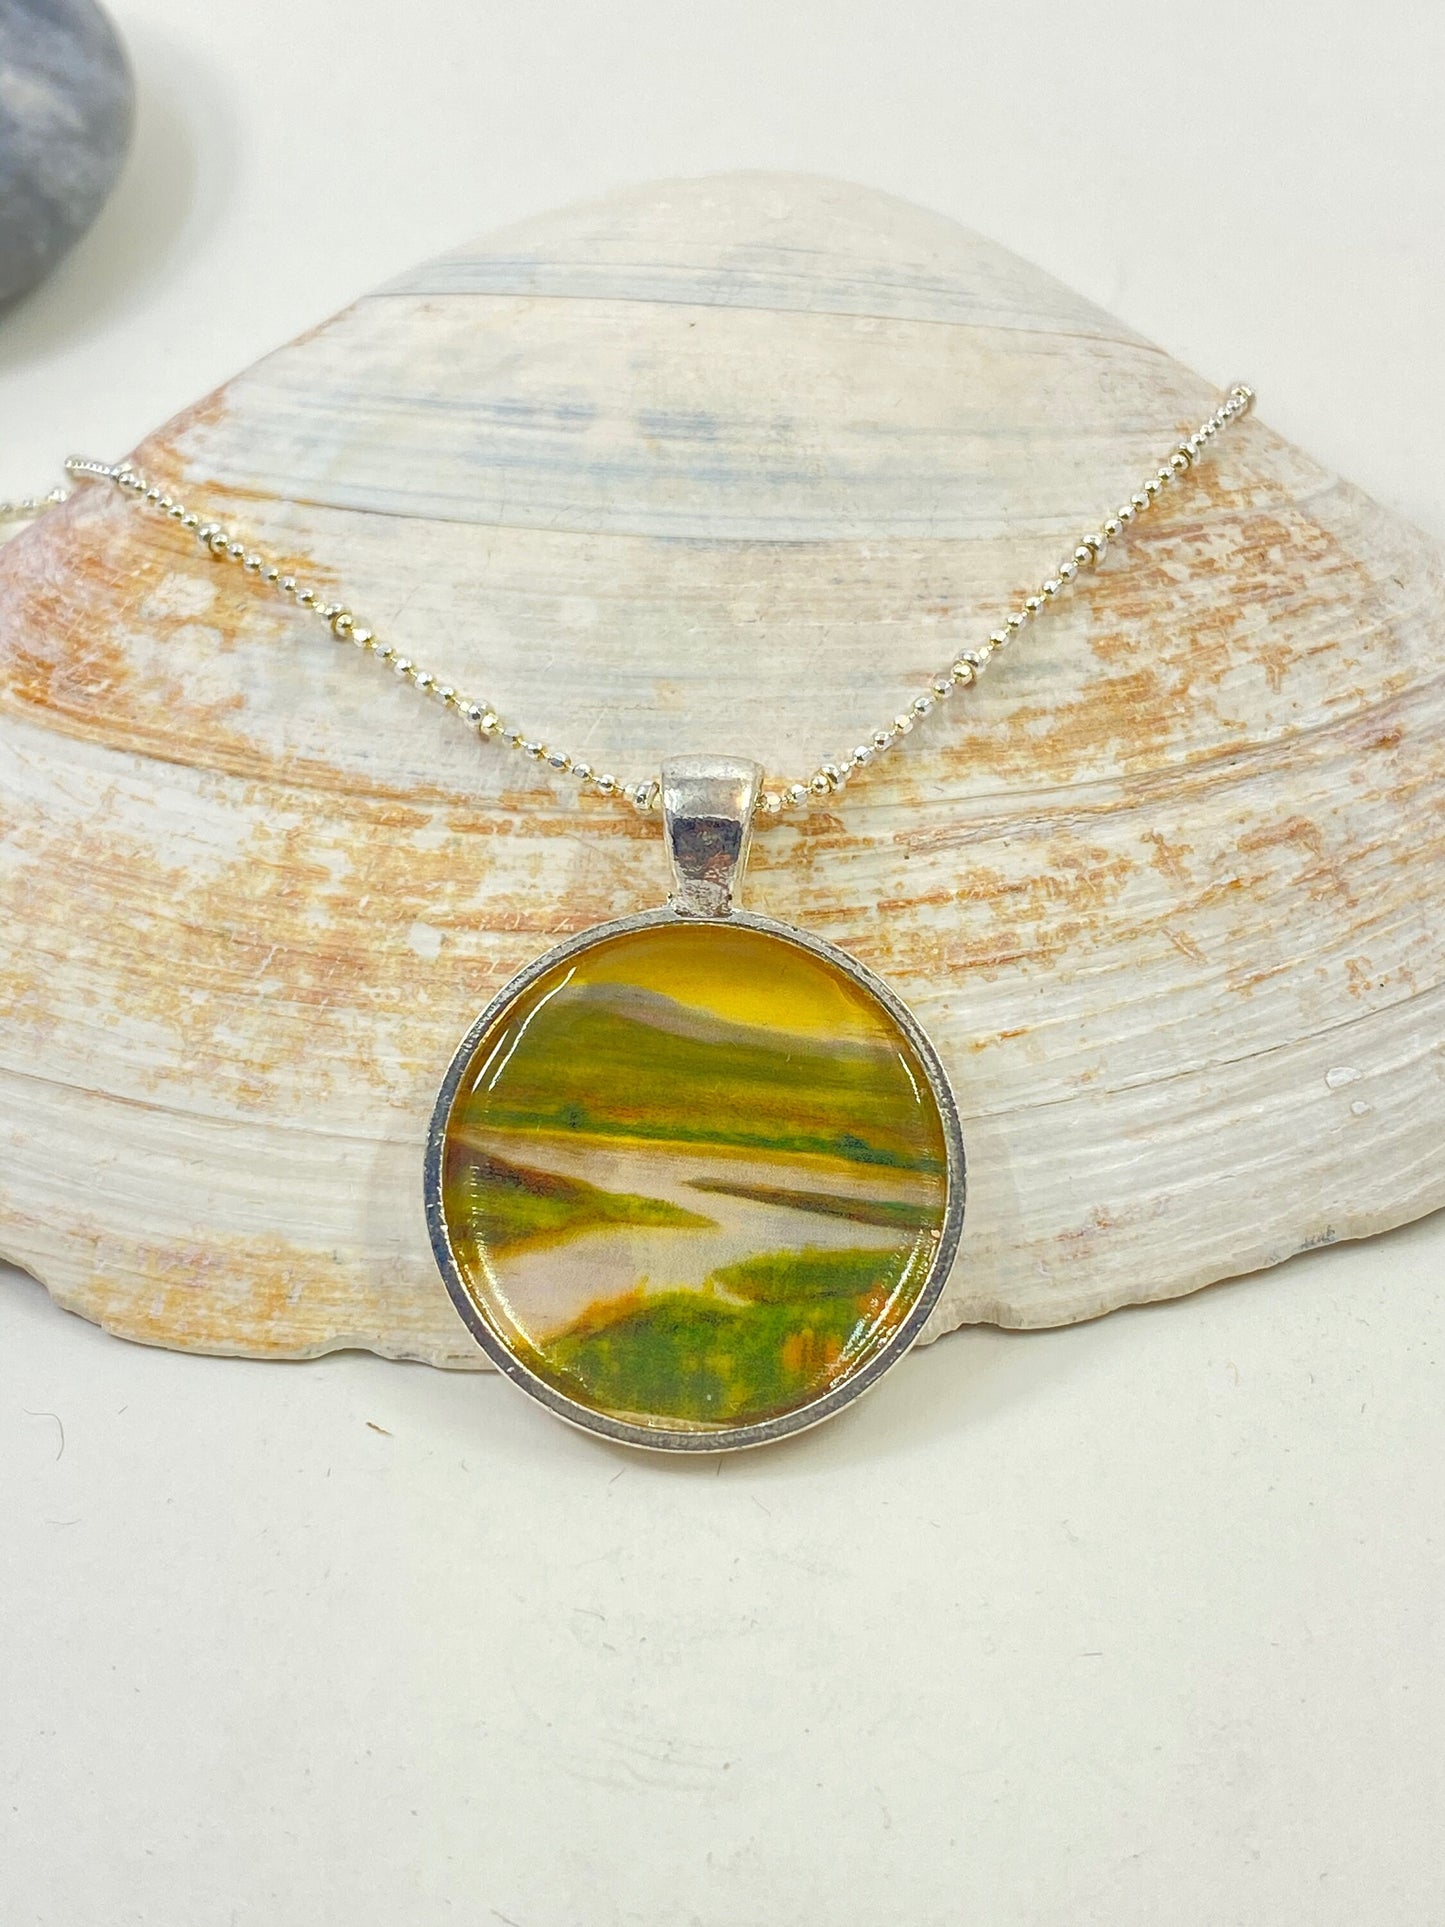 Original and beautiful Maine river scene hand painted pendant. Set in a silver bezel on a sterling silver chain.